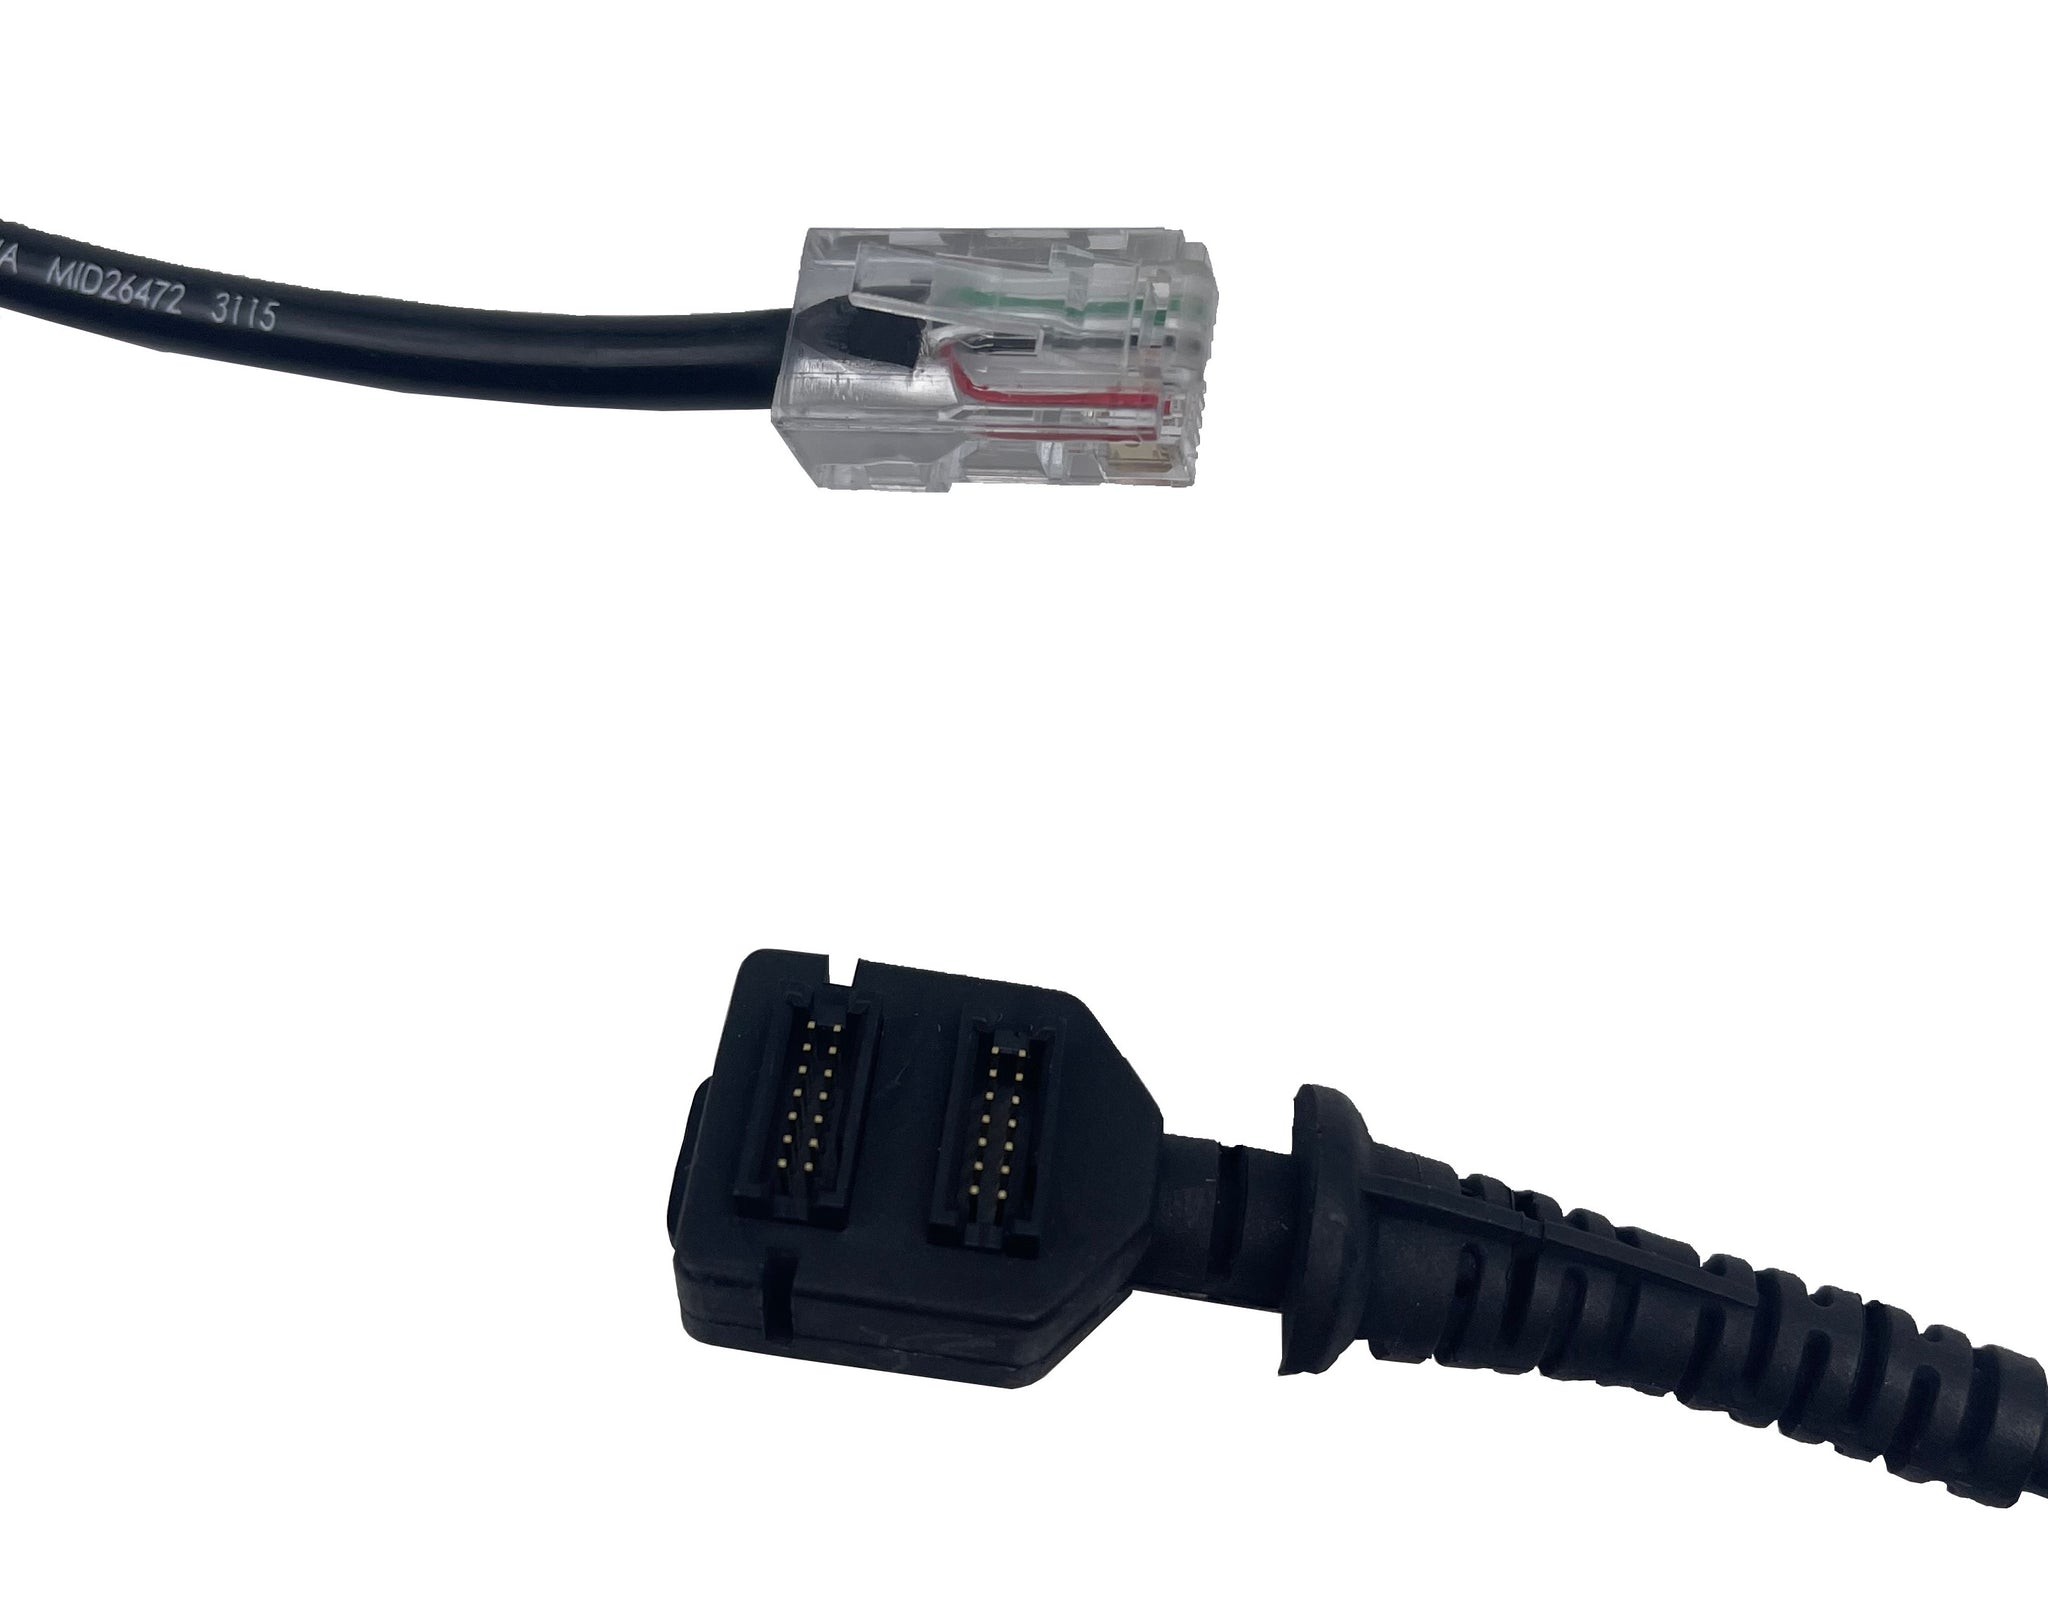 Verifone Vx805/Vx820 PIN Pad CoiledCable, Connects to Verifone Vx520 T